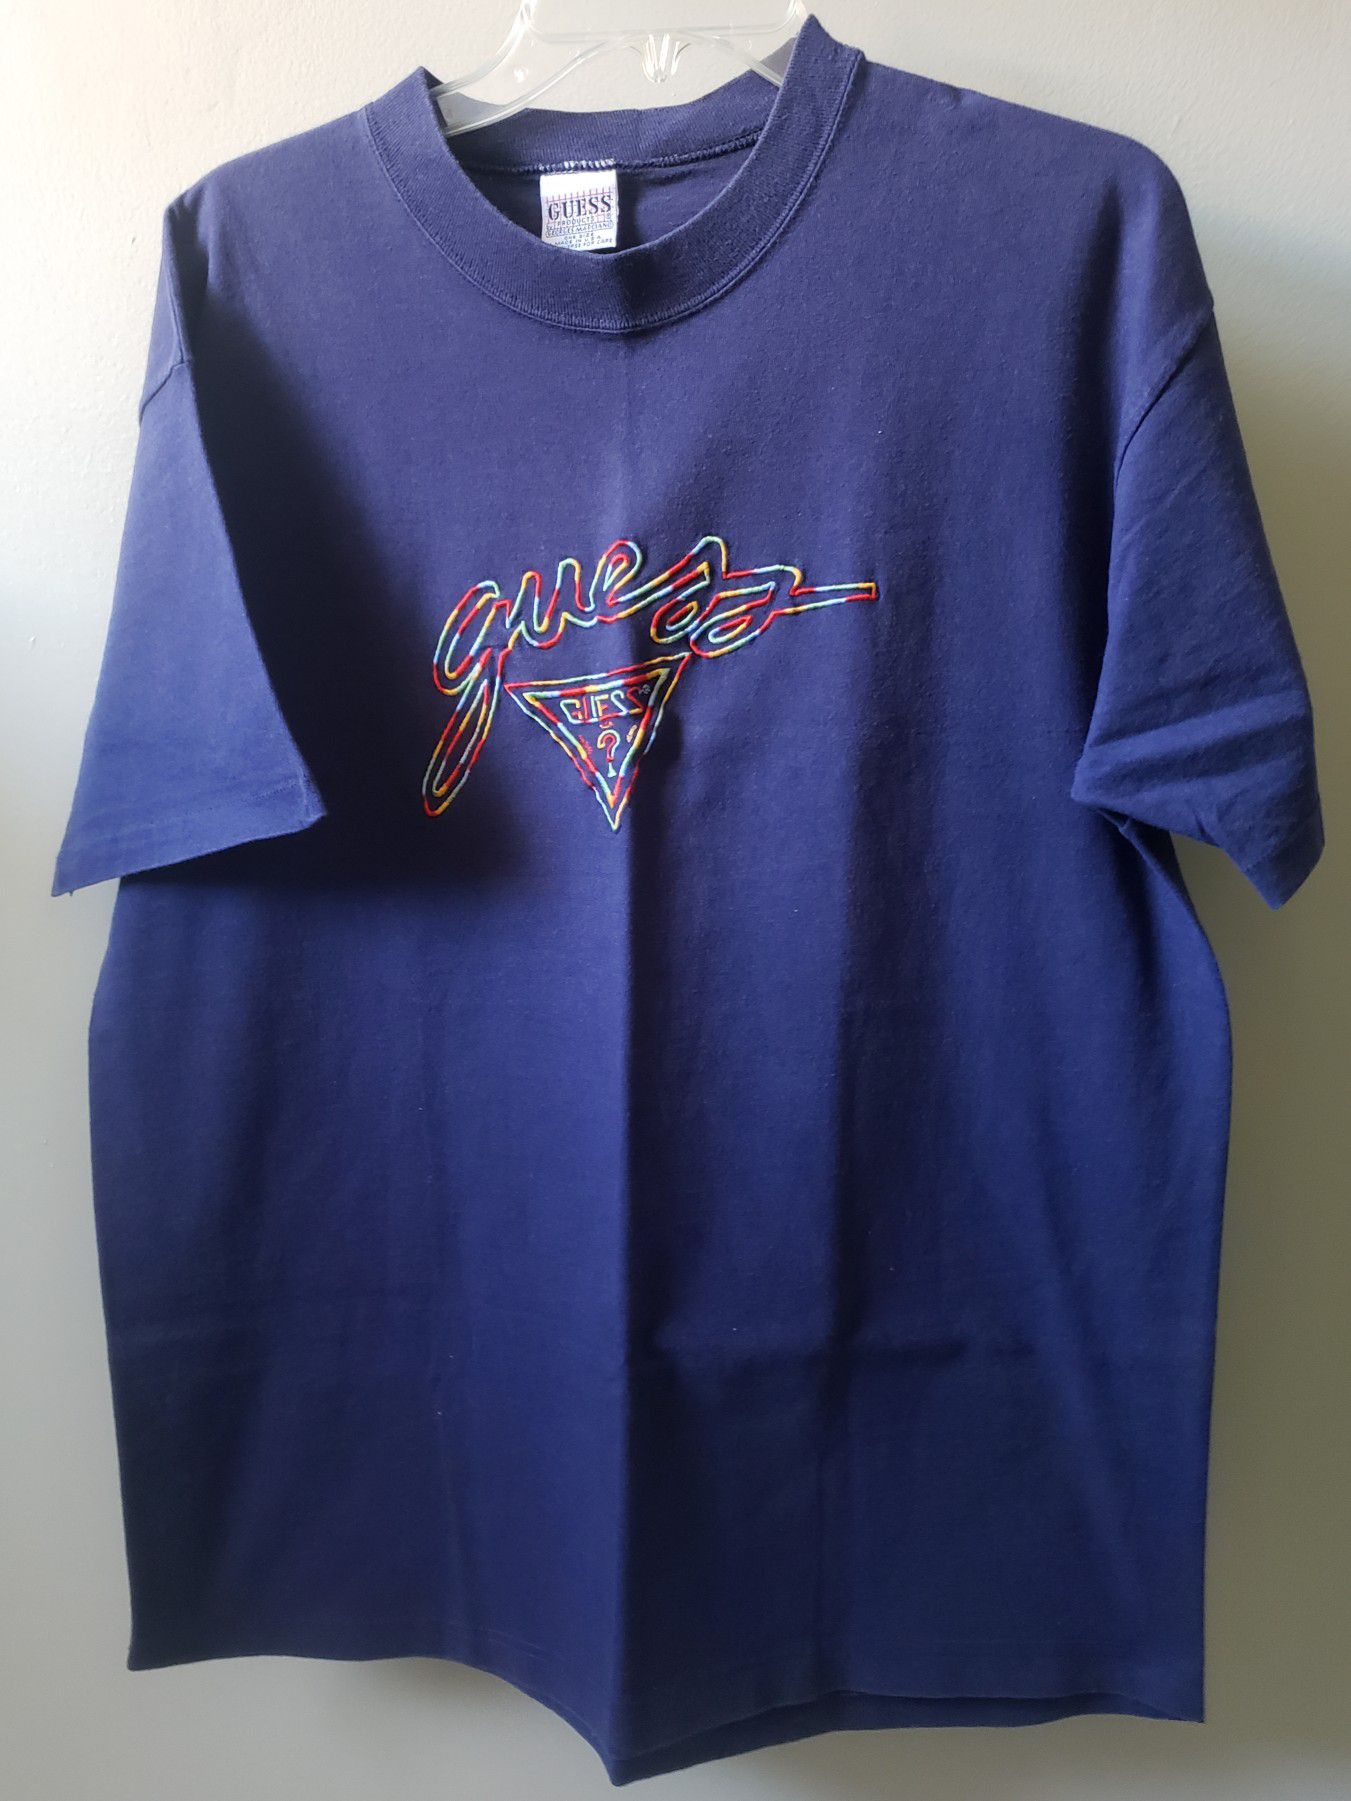 Vintage Guess Embroidered Tee size OSFA